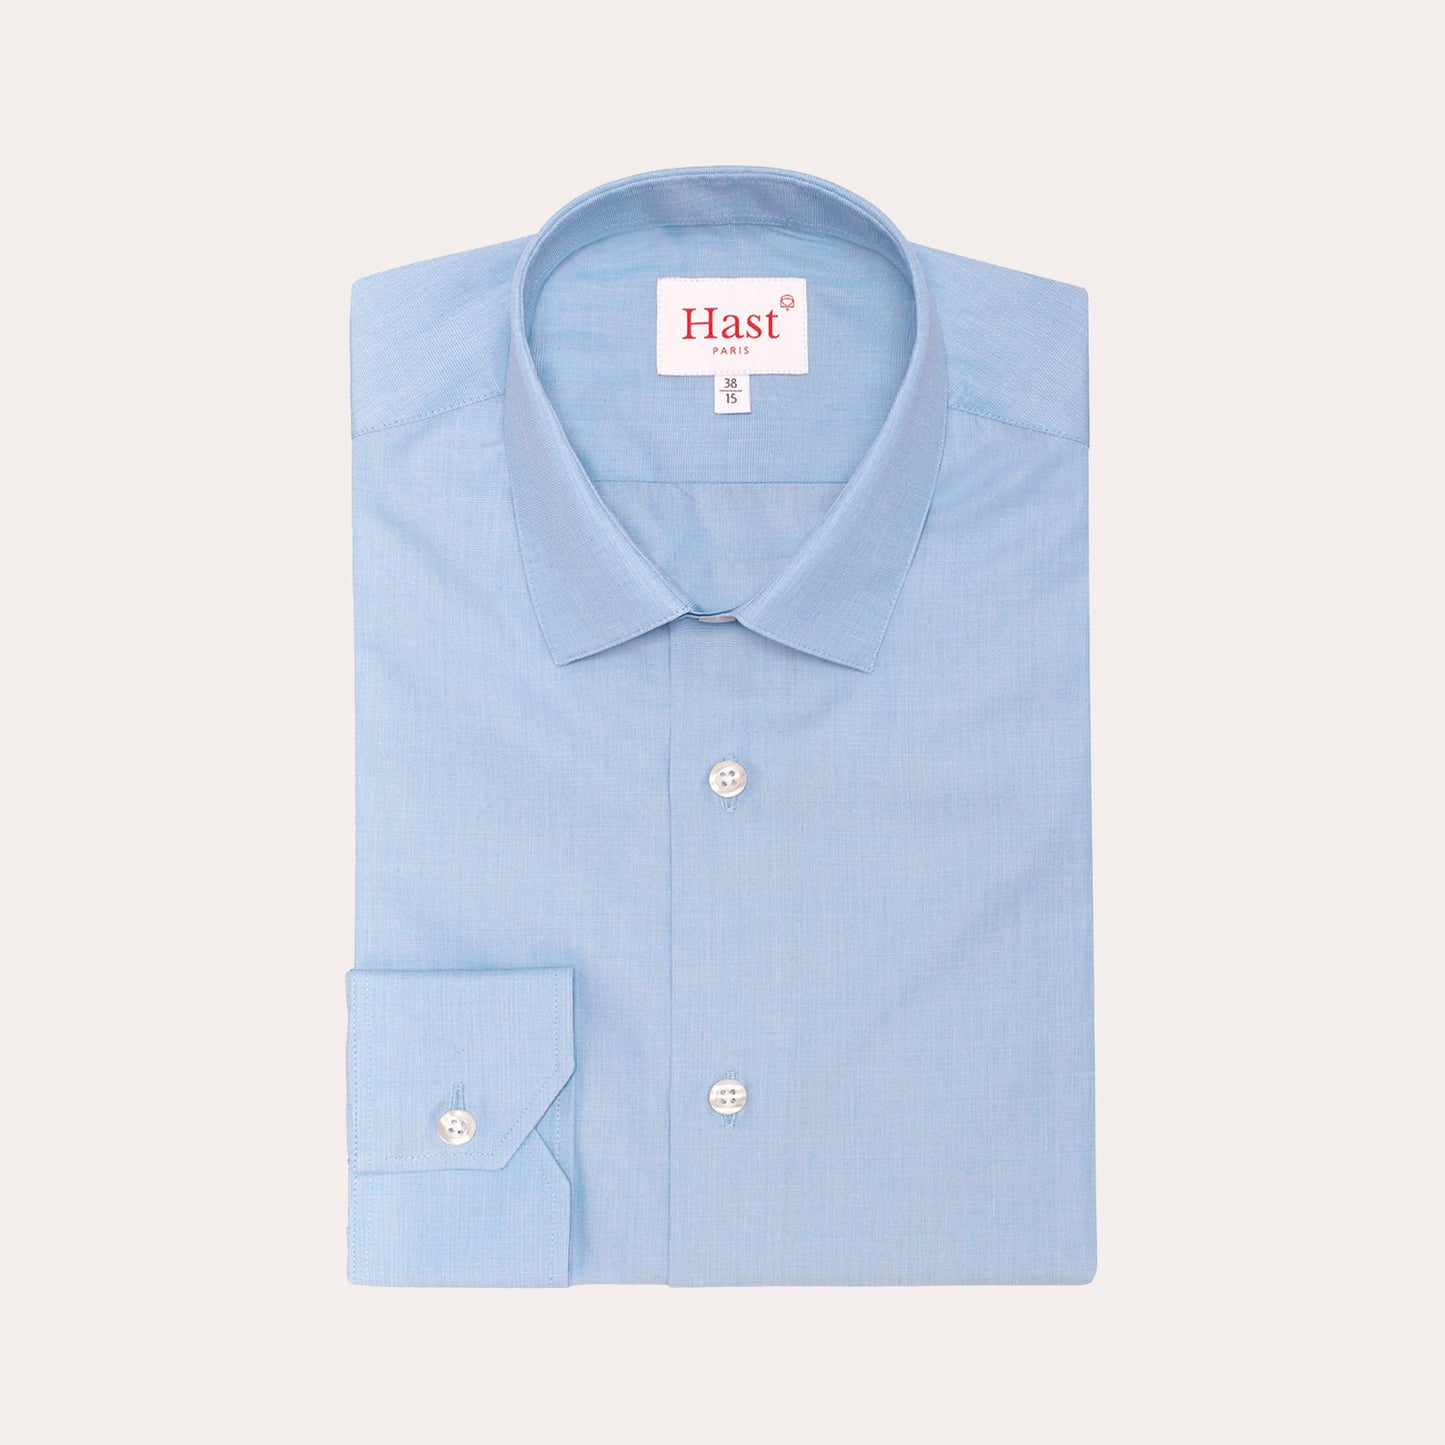 Blue double-twisted thread-on-fil shirt